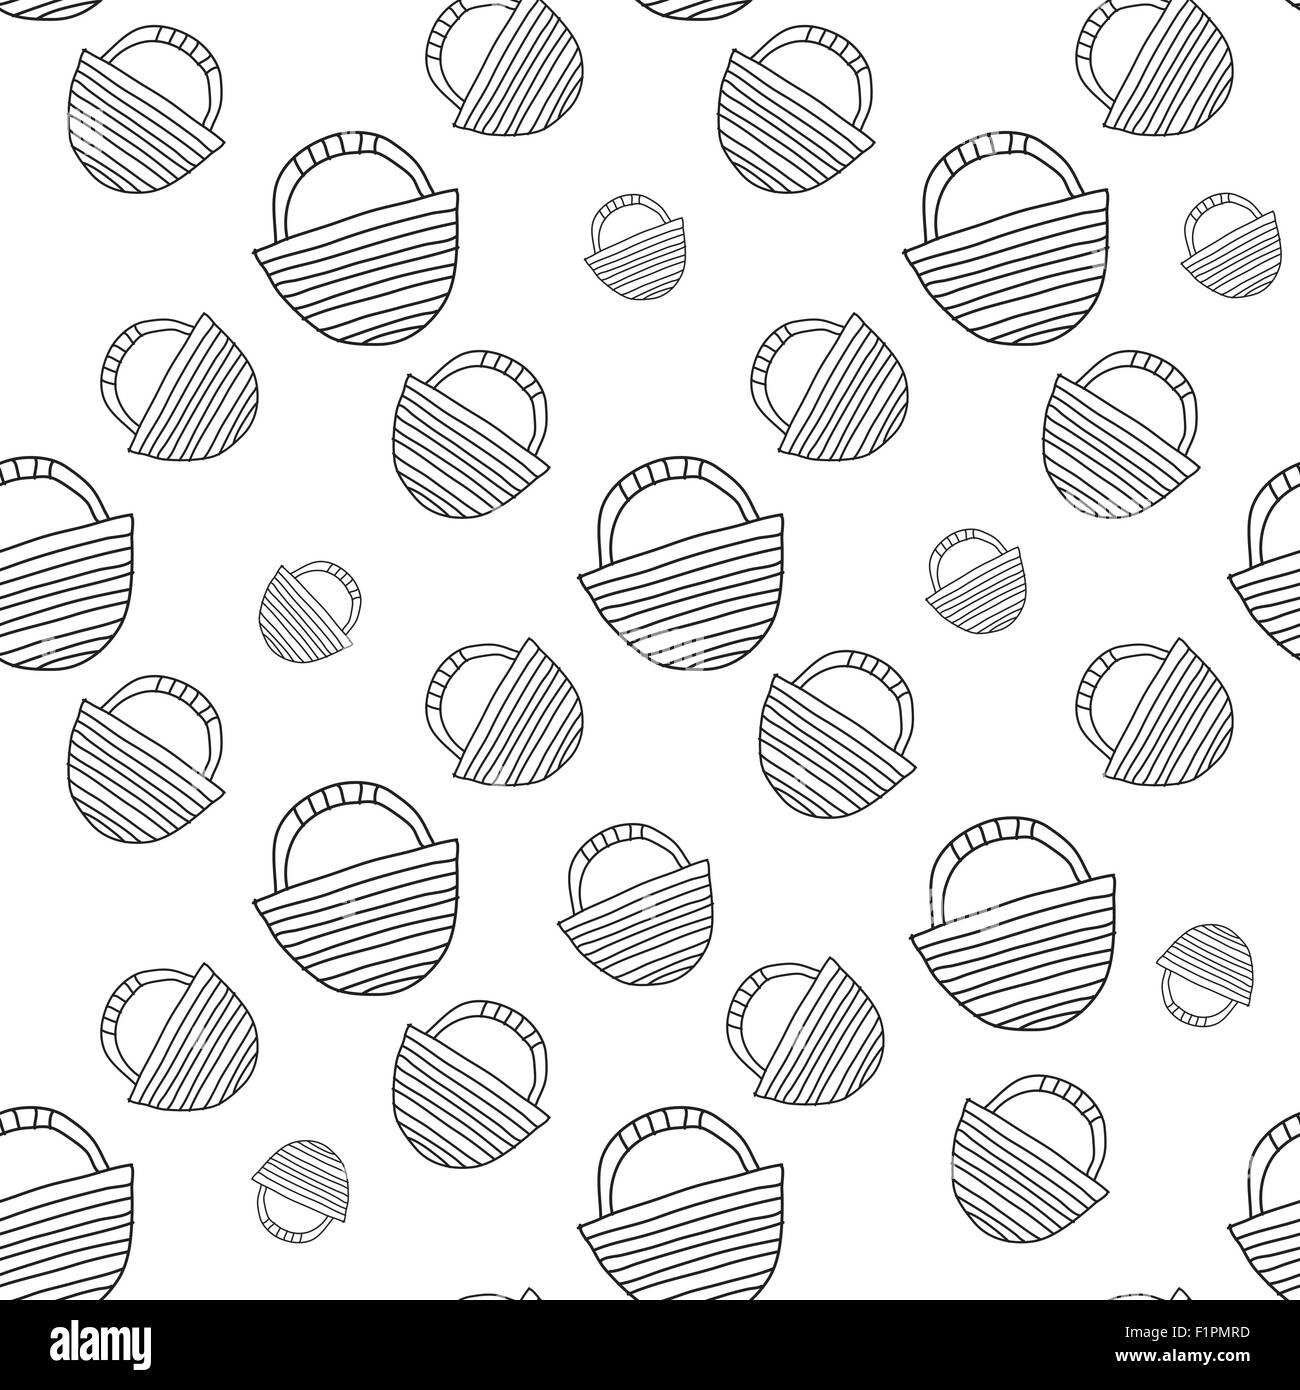 travel bag Vector seamless illustration in black and white color Stock Vector